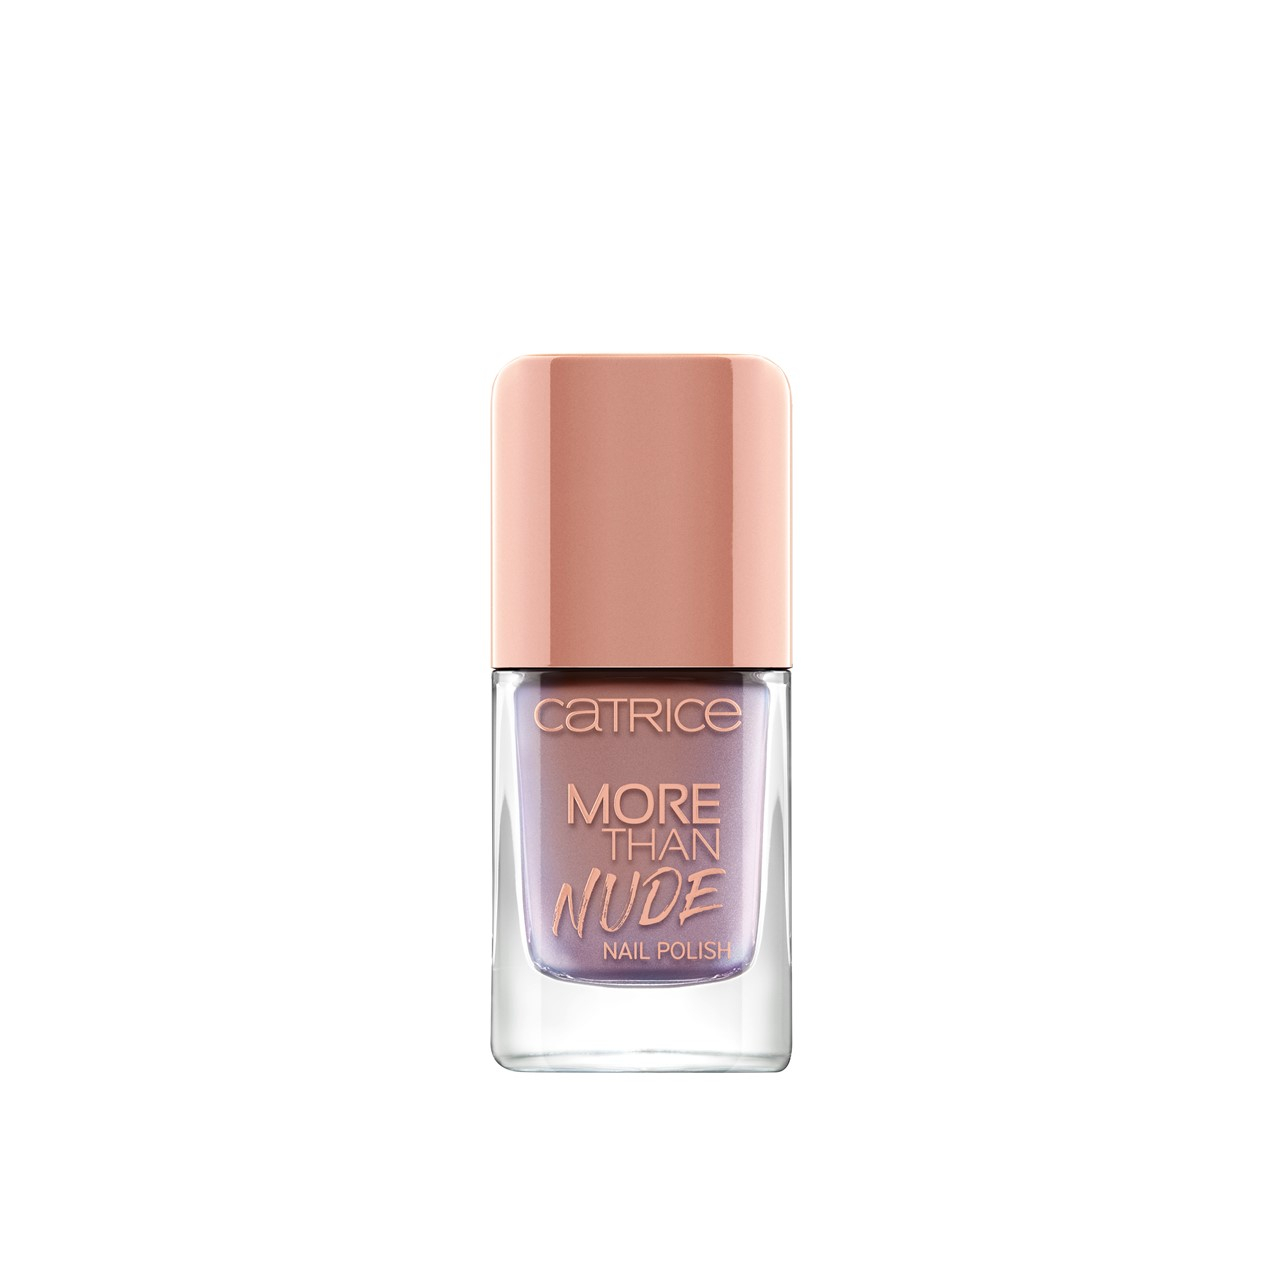 Catrice More Than Nude Nail Polish 09 Brownie Not Blondie! 10.5ml (0.36fl oz)